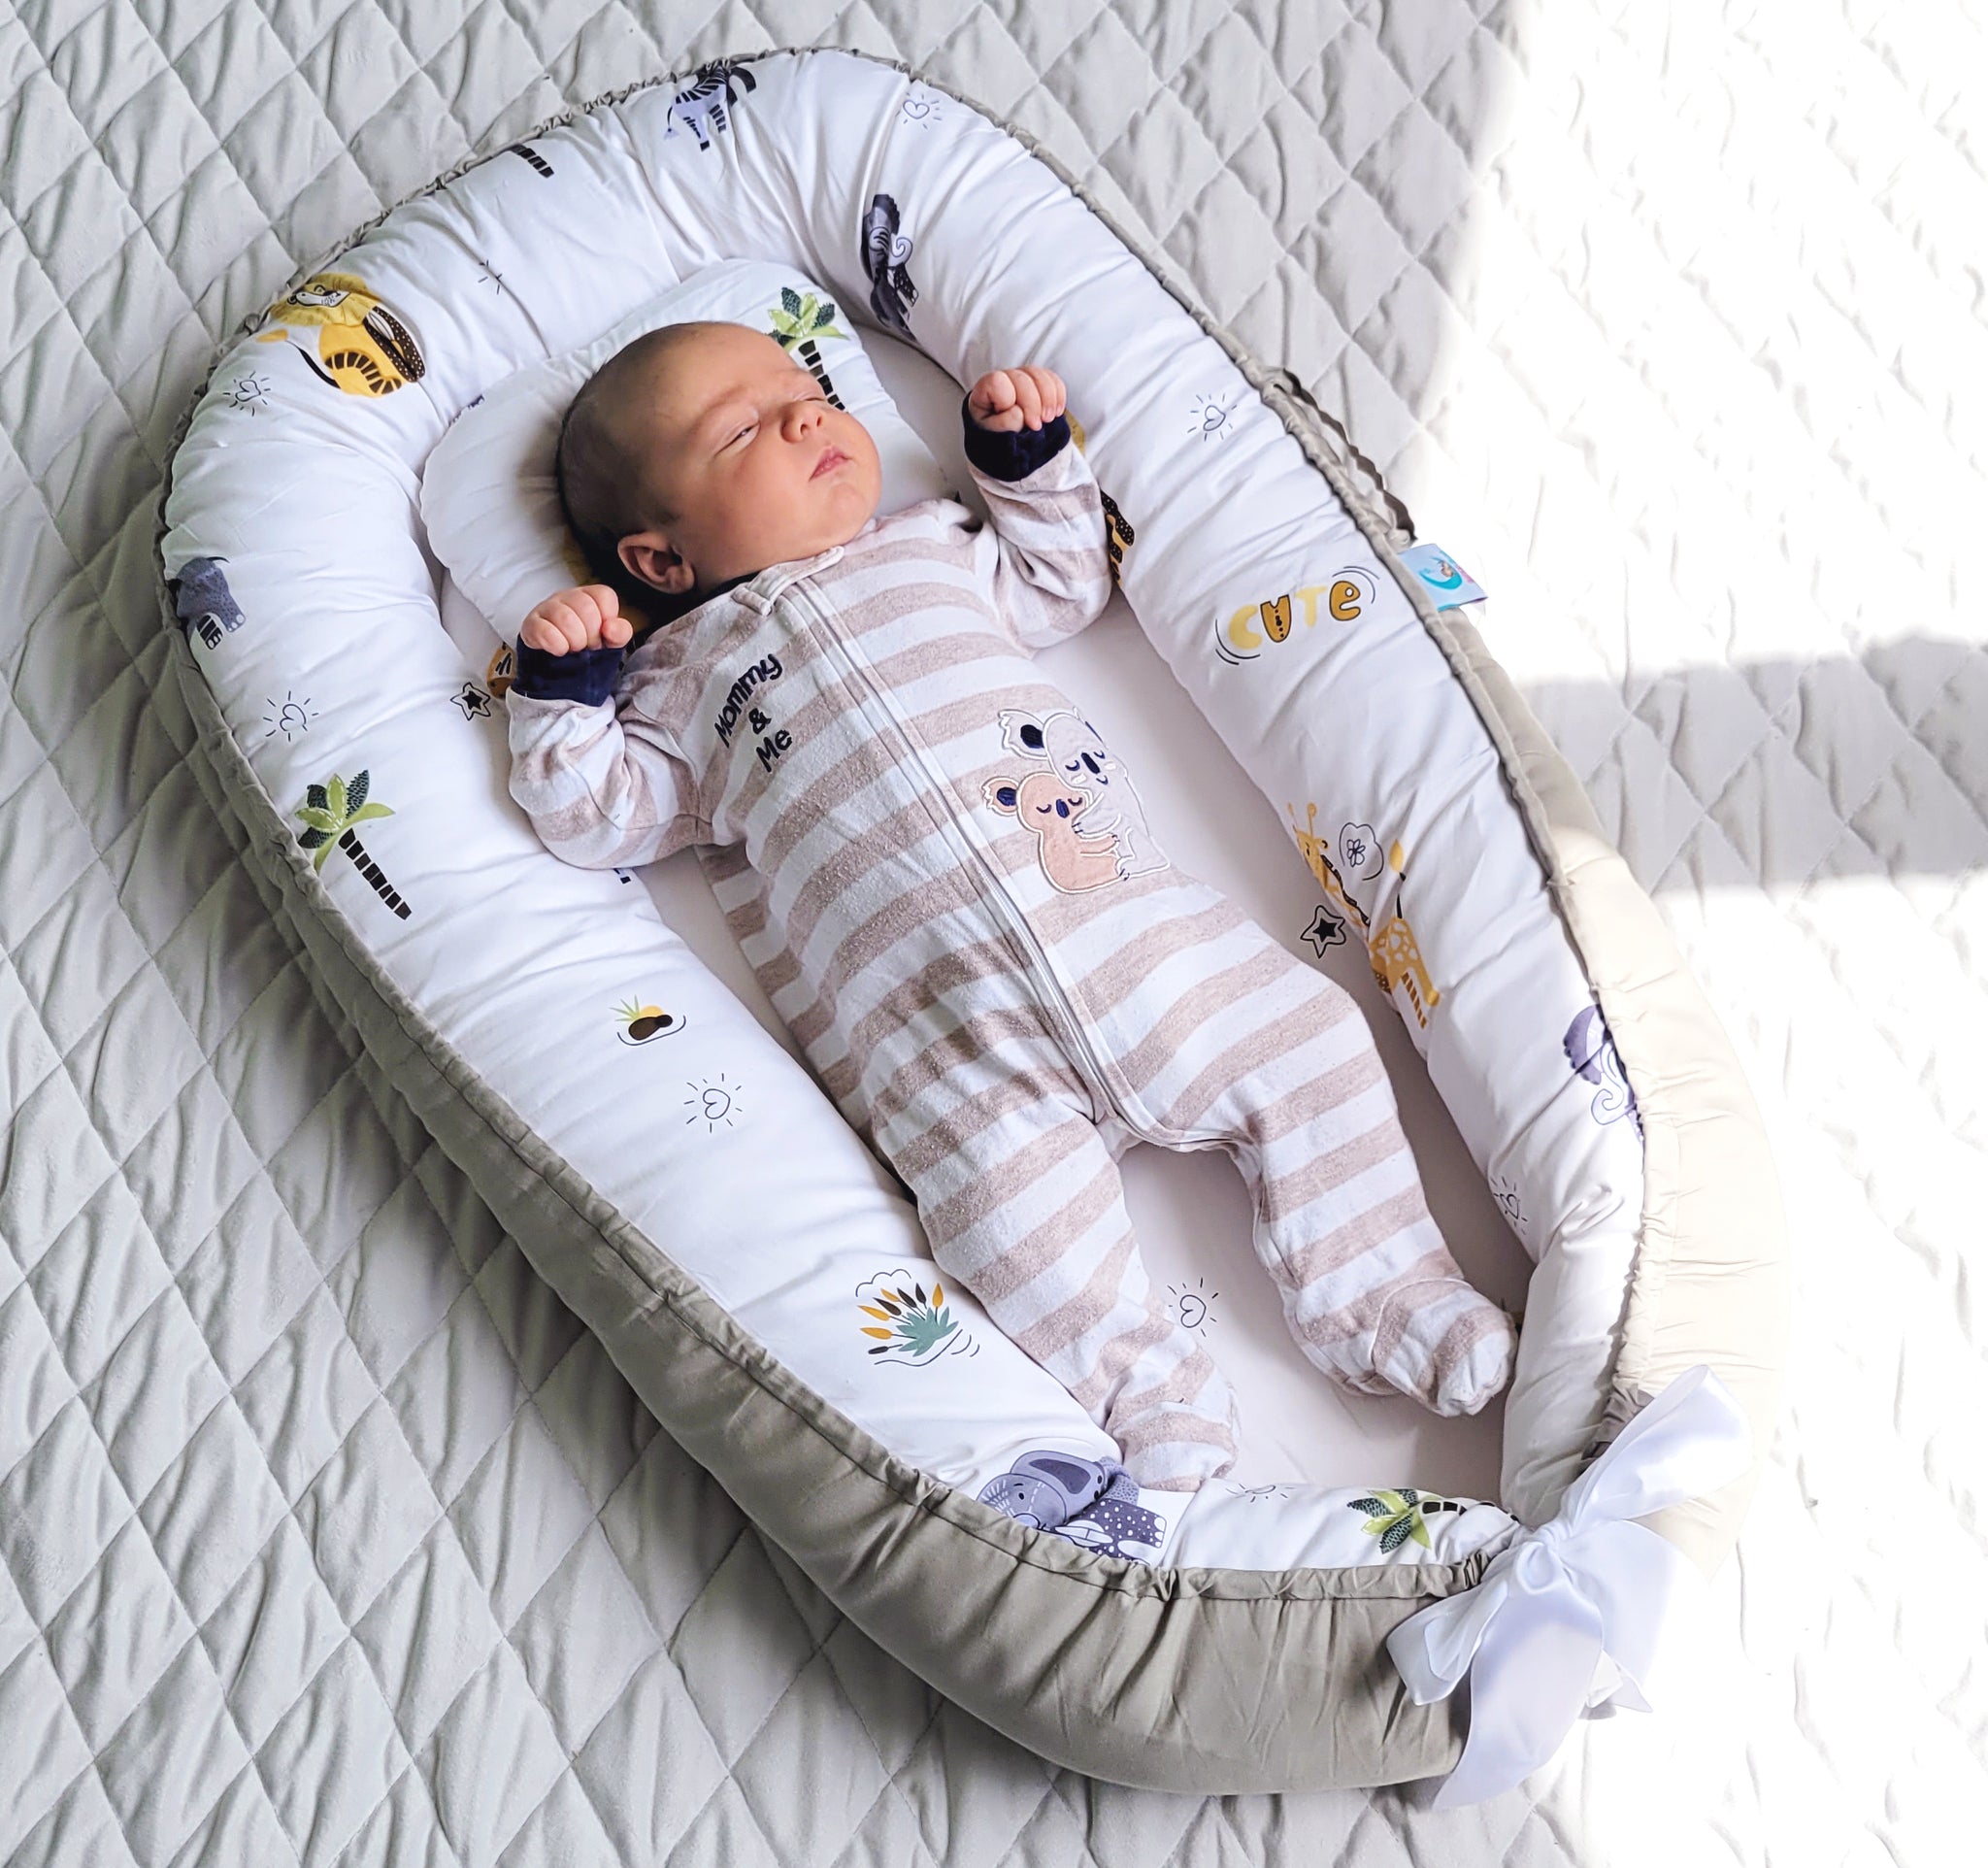 Buy ProBaby Newborn Lounger Nest Bed With Pillow For Co-sleeping